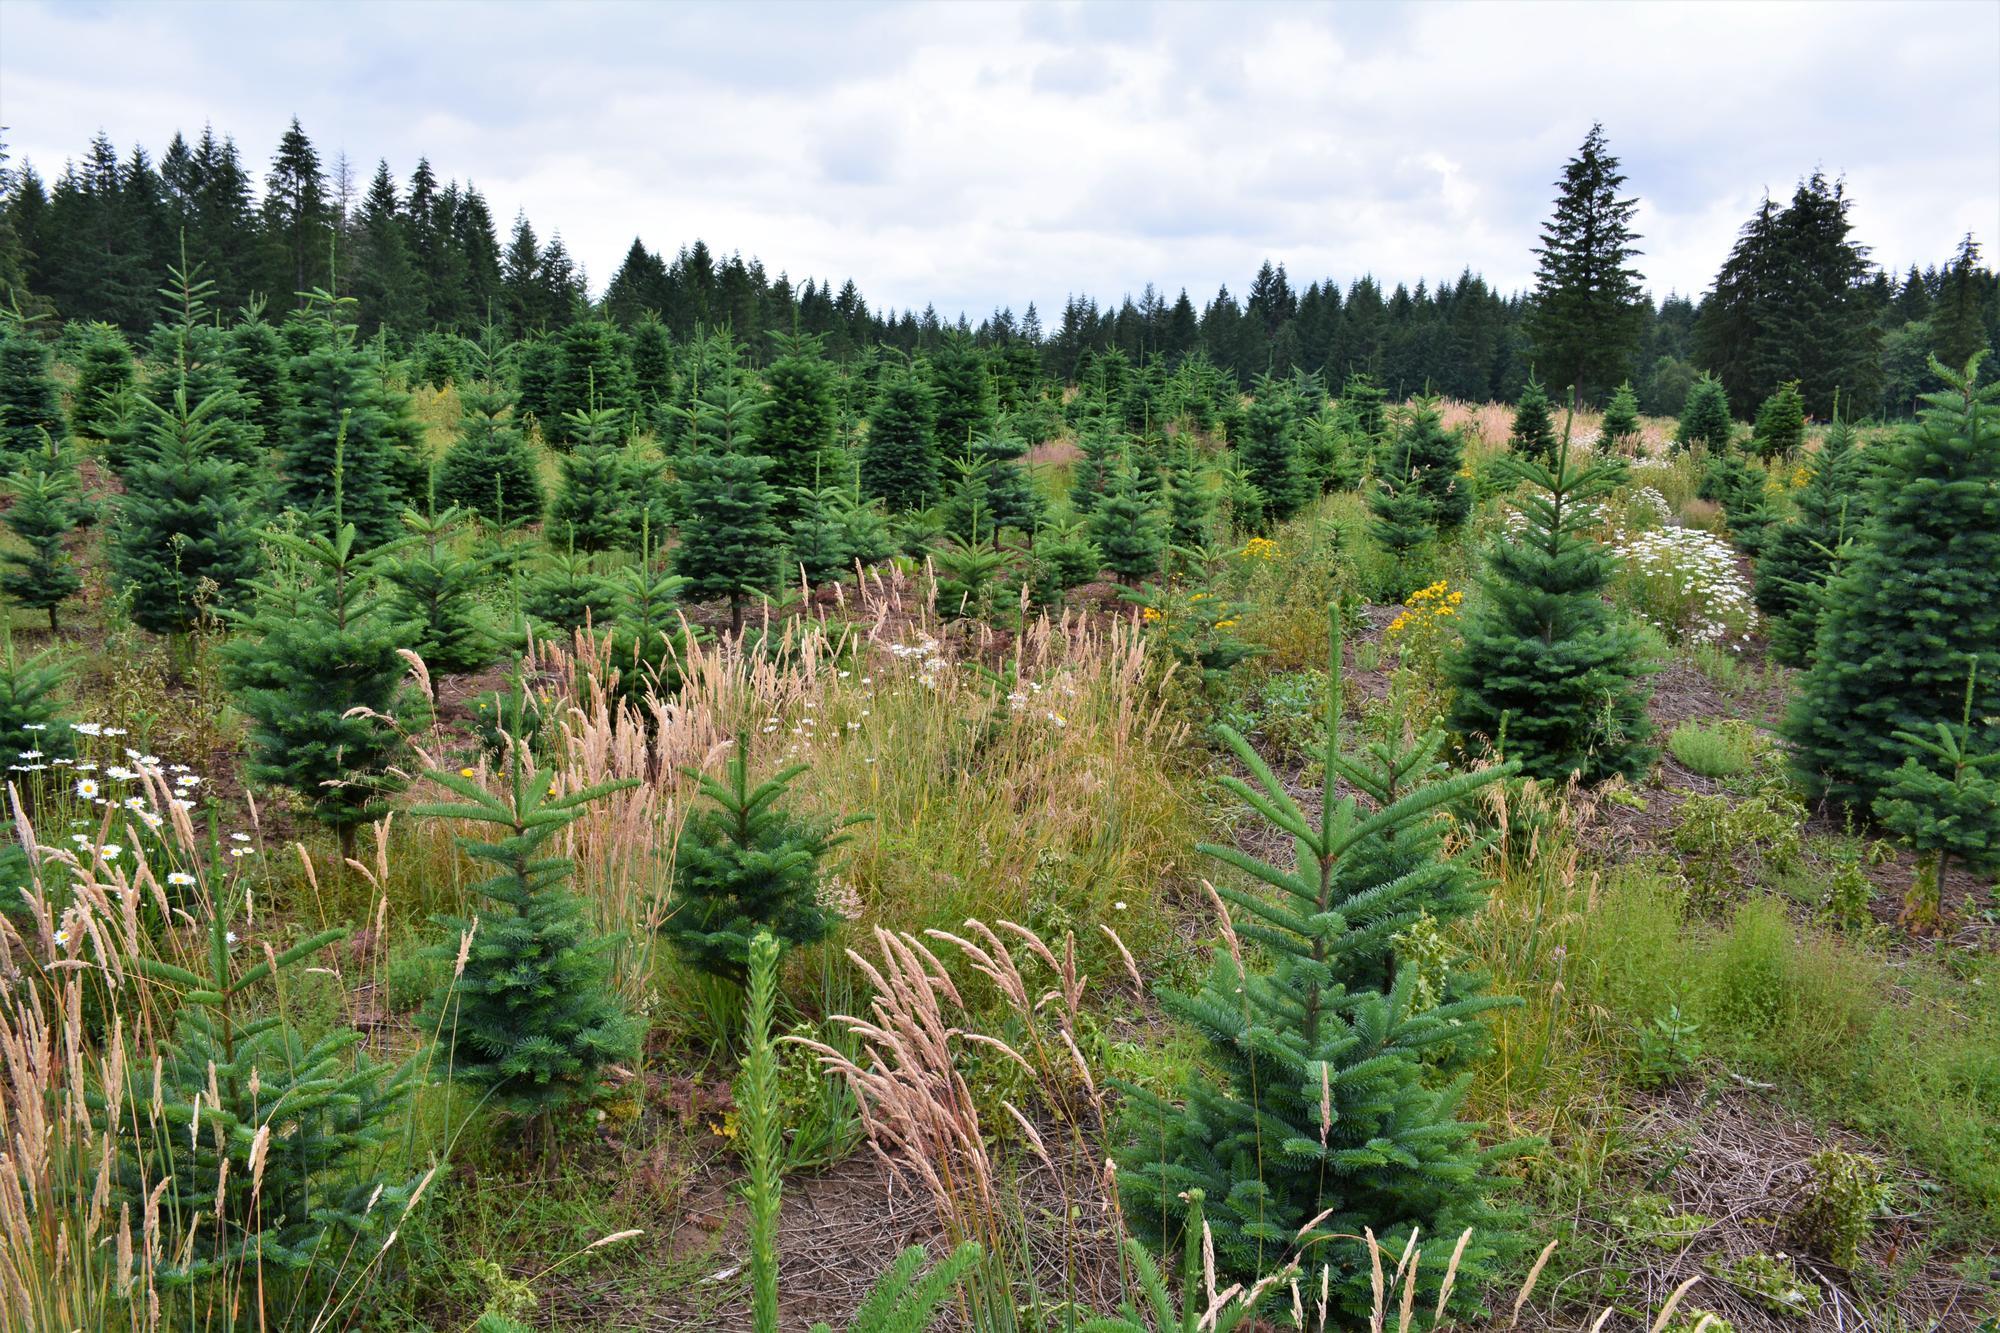 A Christmas tree farm with heavy growth of other plants between rows of trees.